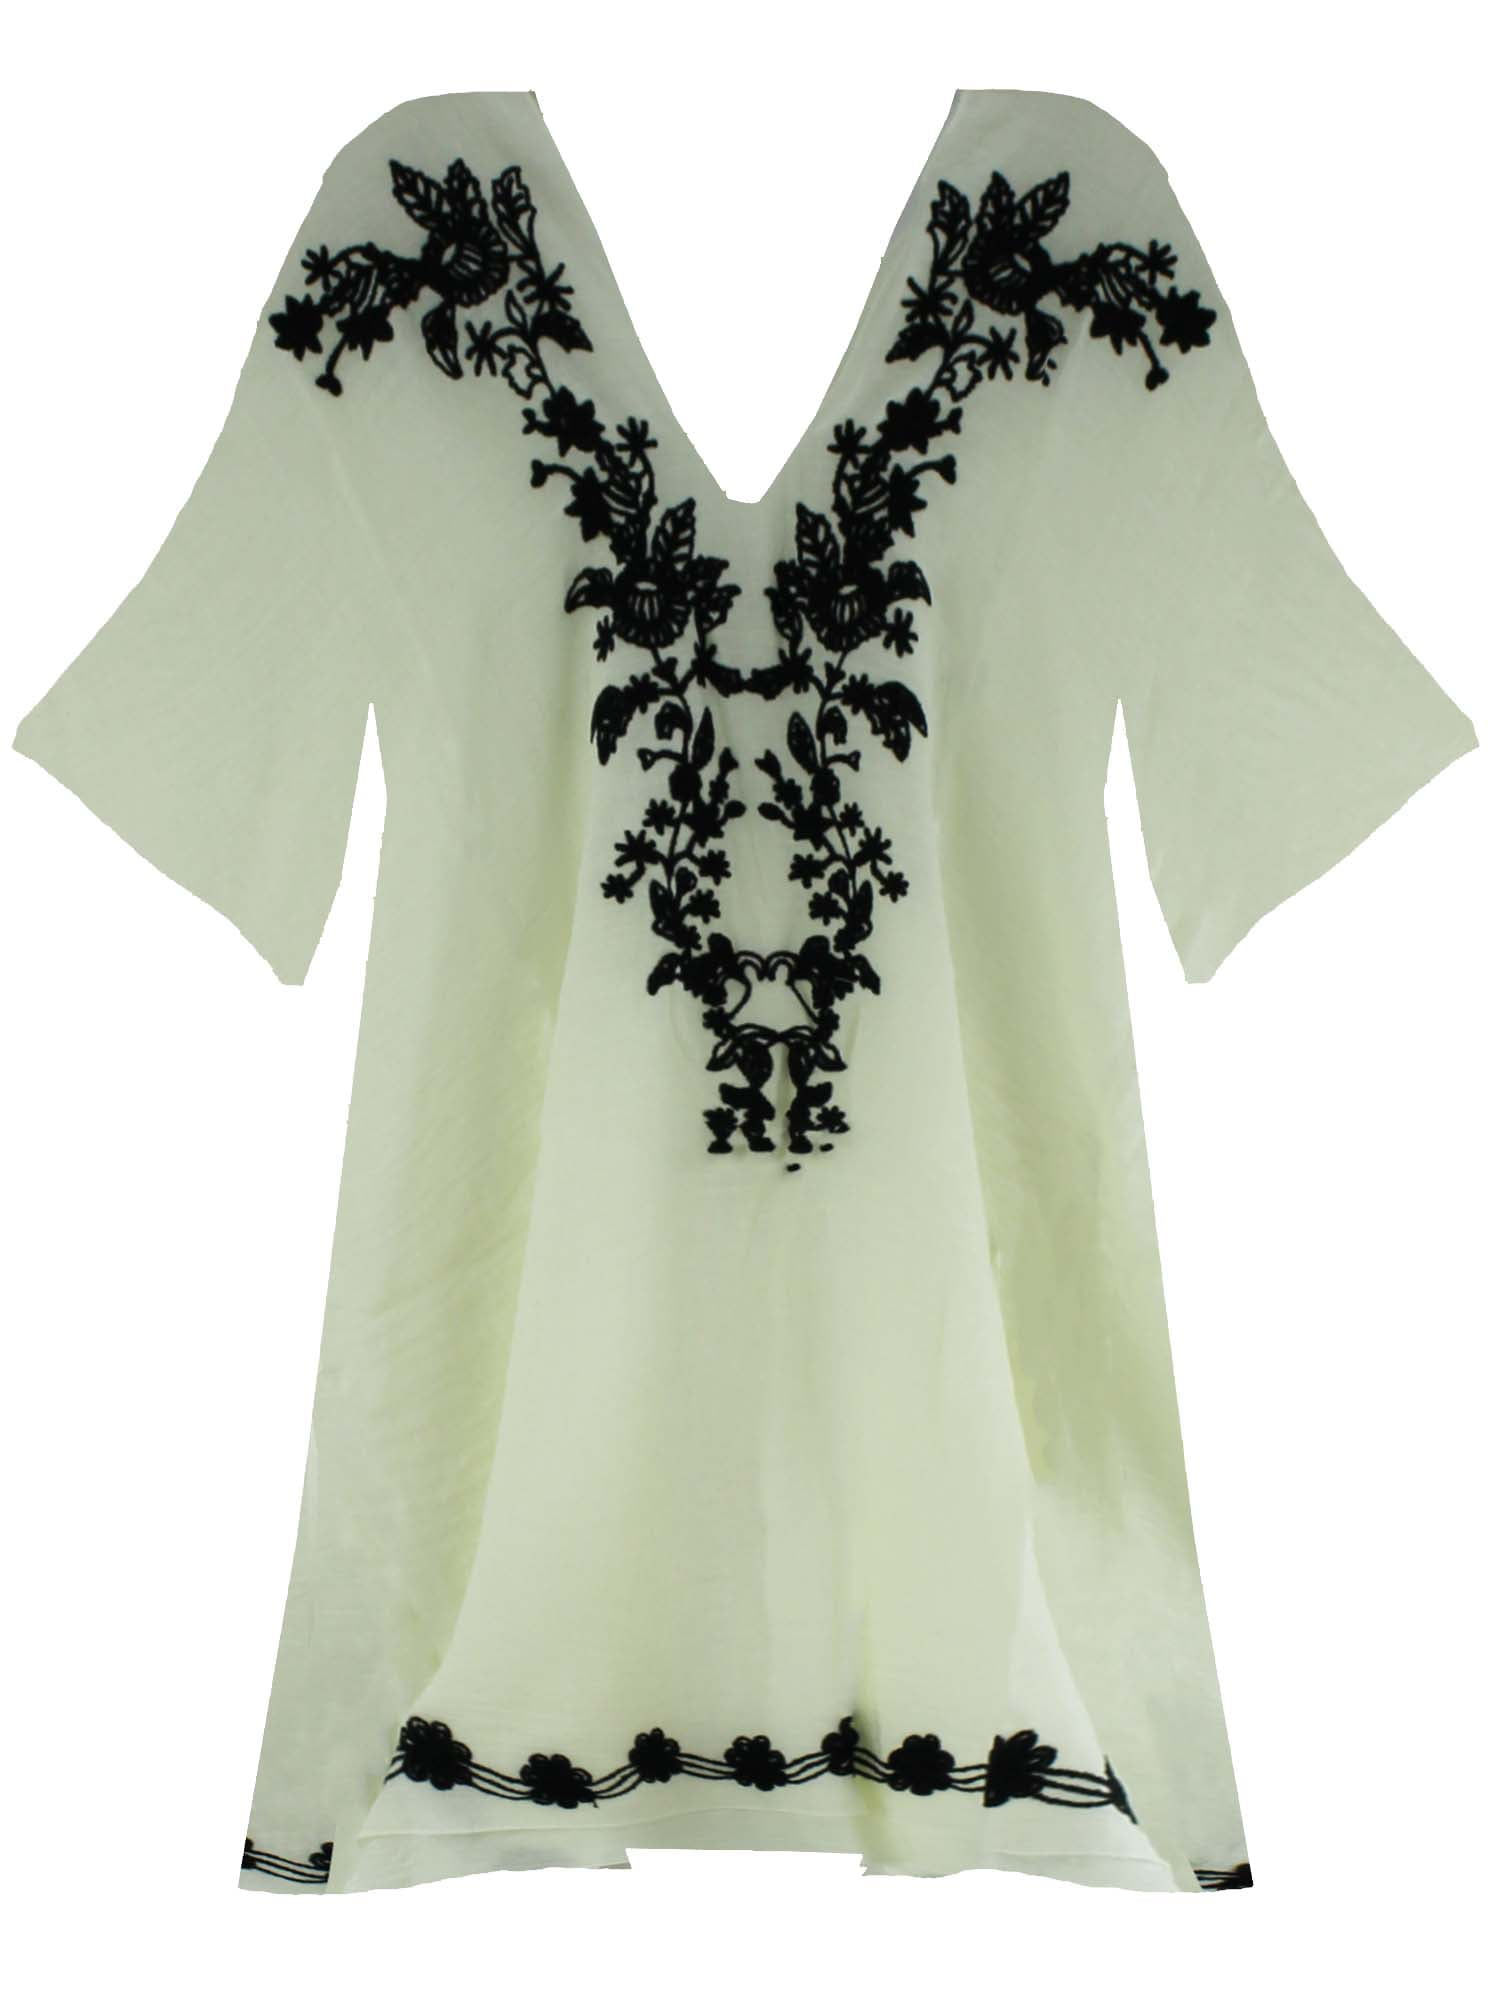 Black Embroidered Sheer White Beach Cover Up Tunic Top - Walmart.com